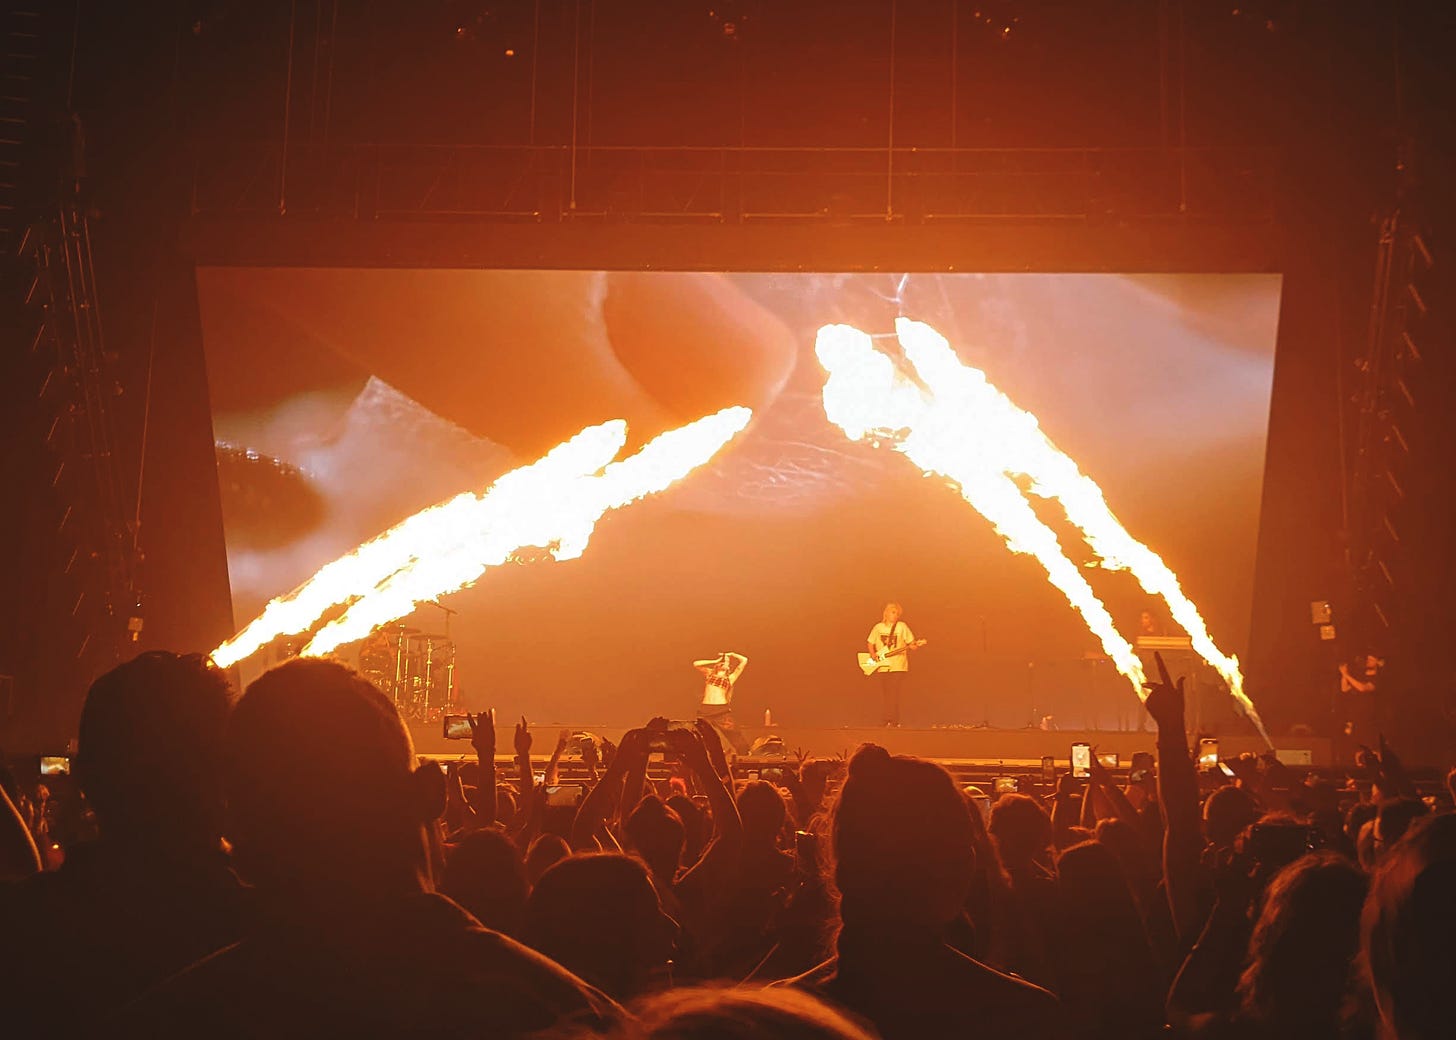 a concert, halsey is on stage singing on their knees, with an image of skin behind them and streaks of pyrotechnic fire on both sides of the stage.